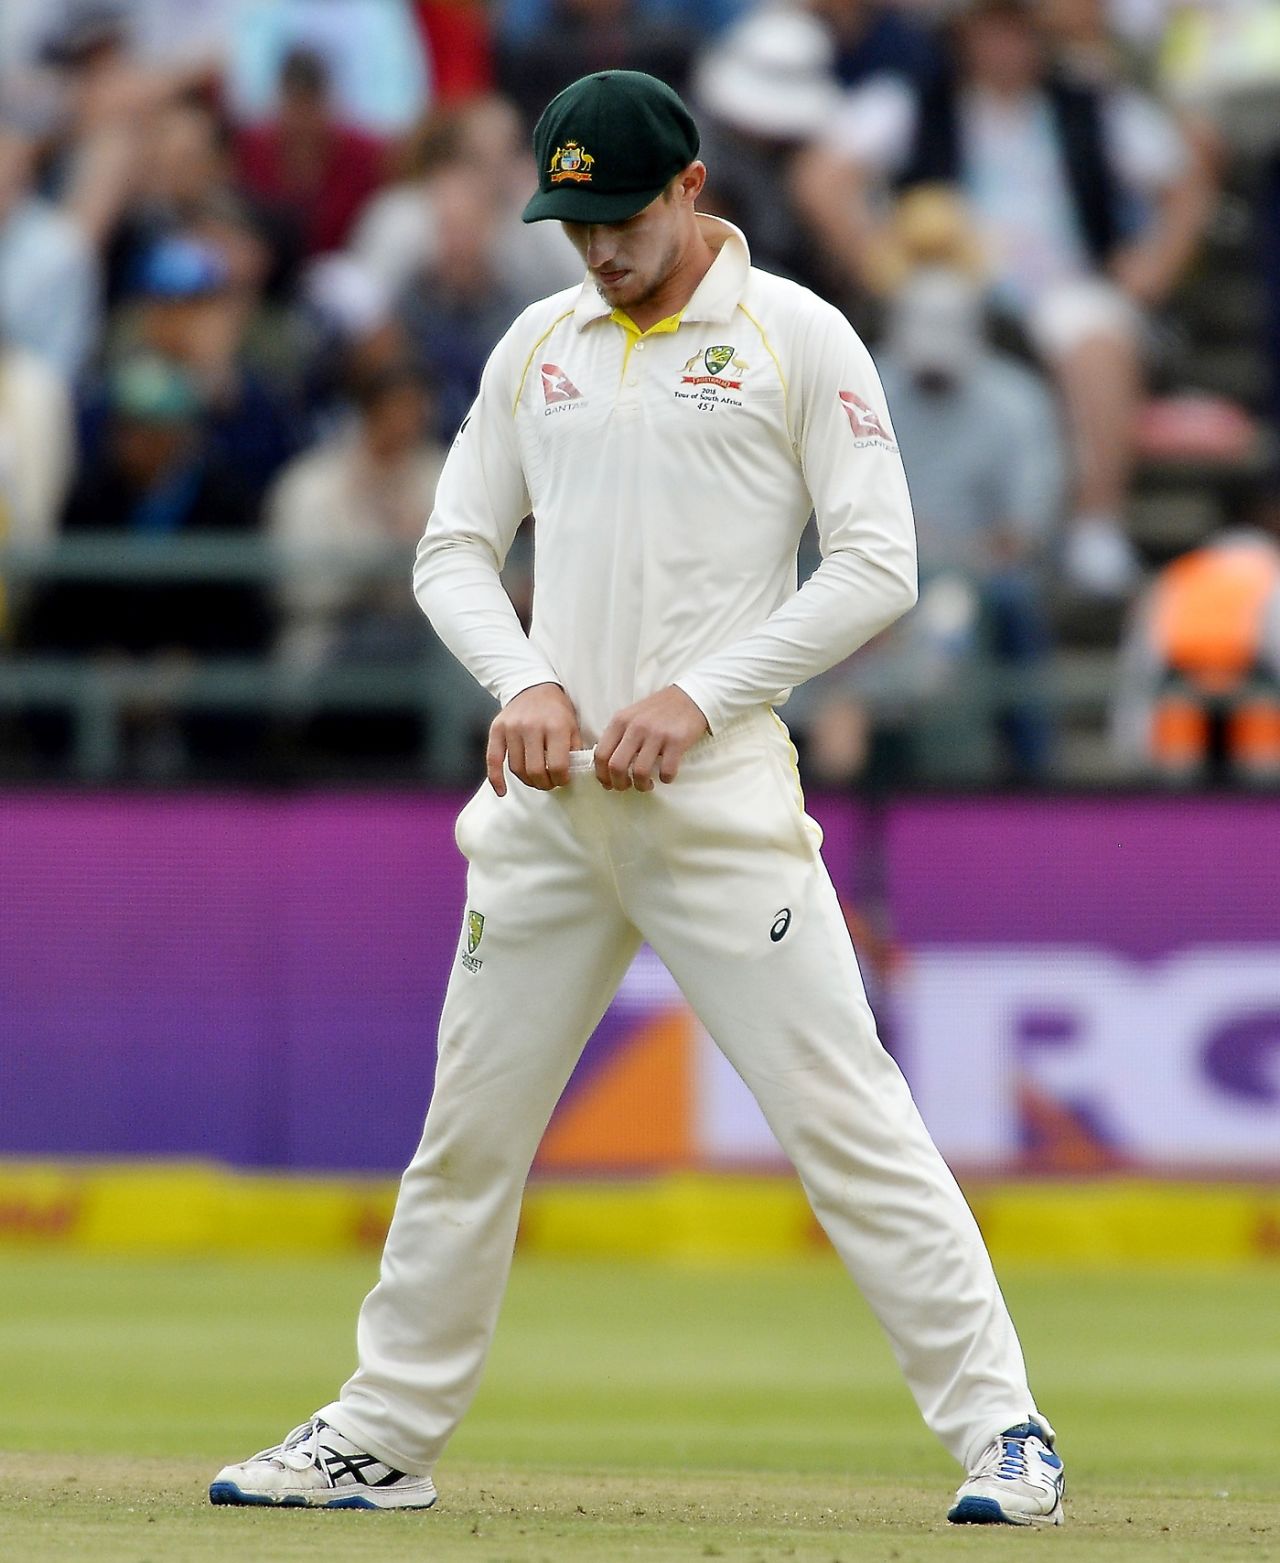 Cameron Bancroft adjusts his pants at short extra cover, South Africa v Australia, 3rd Test, Cape Town, 3rd day, March 24, 2018